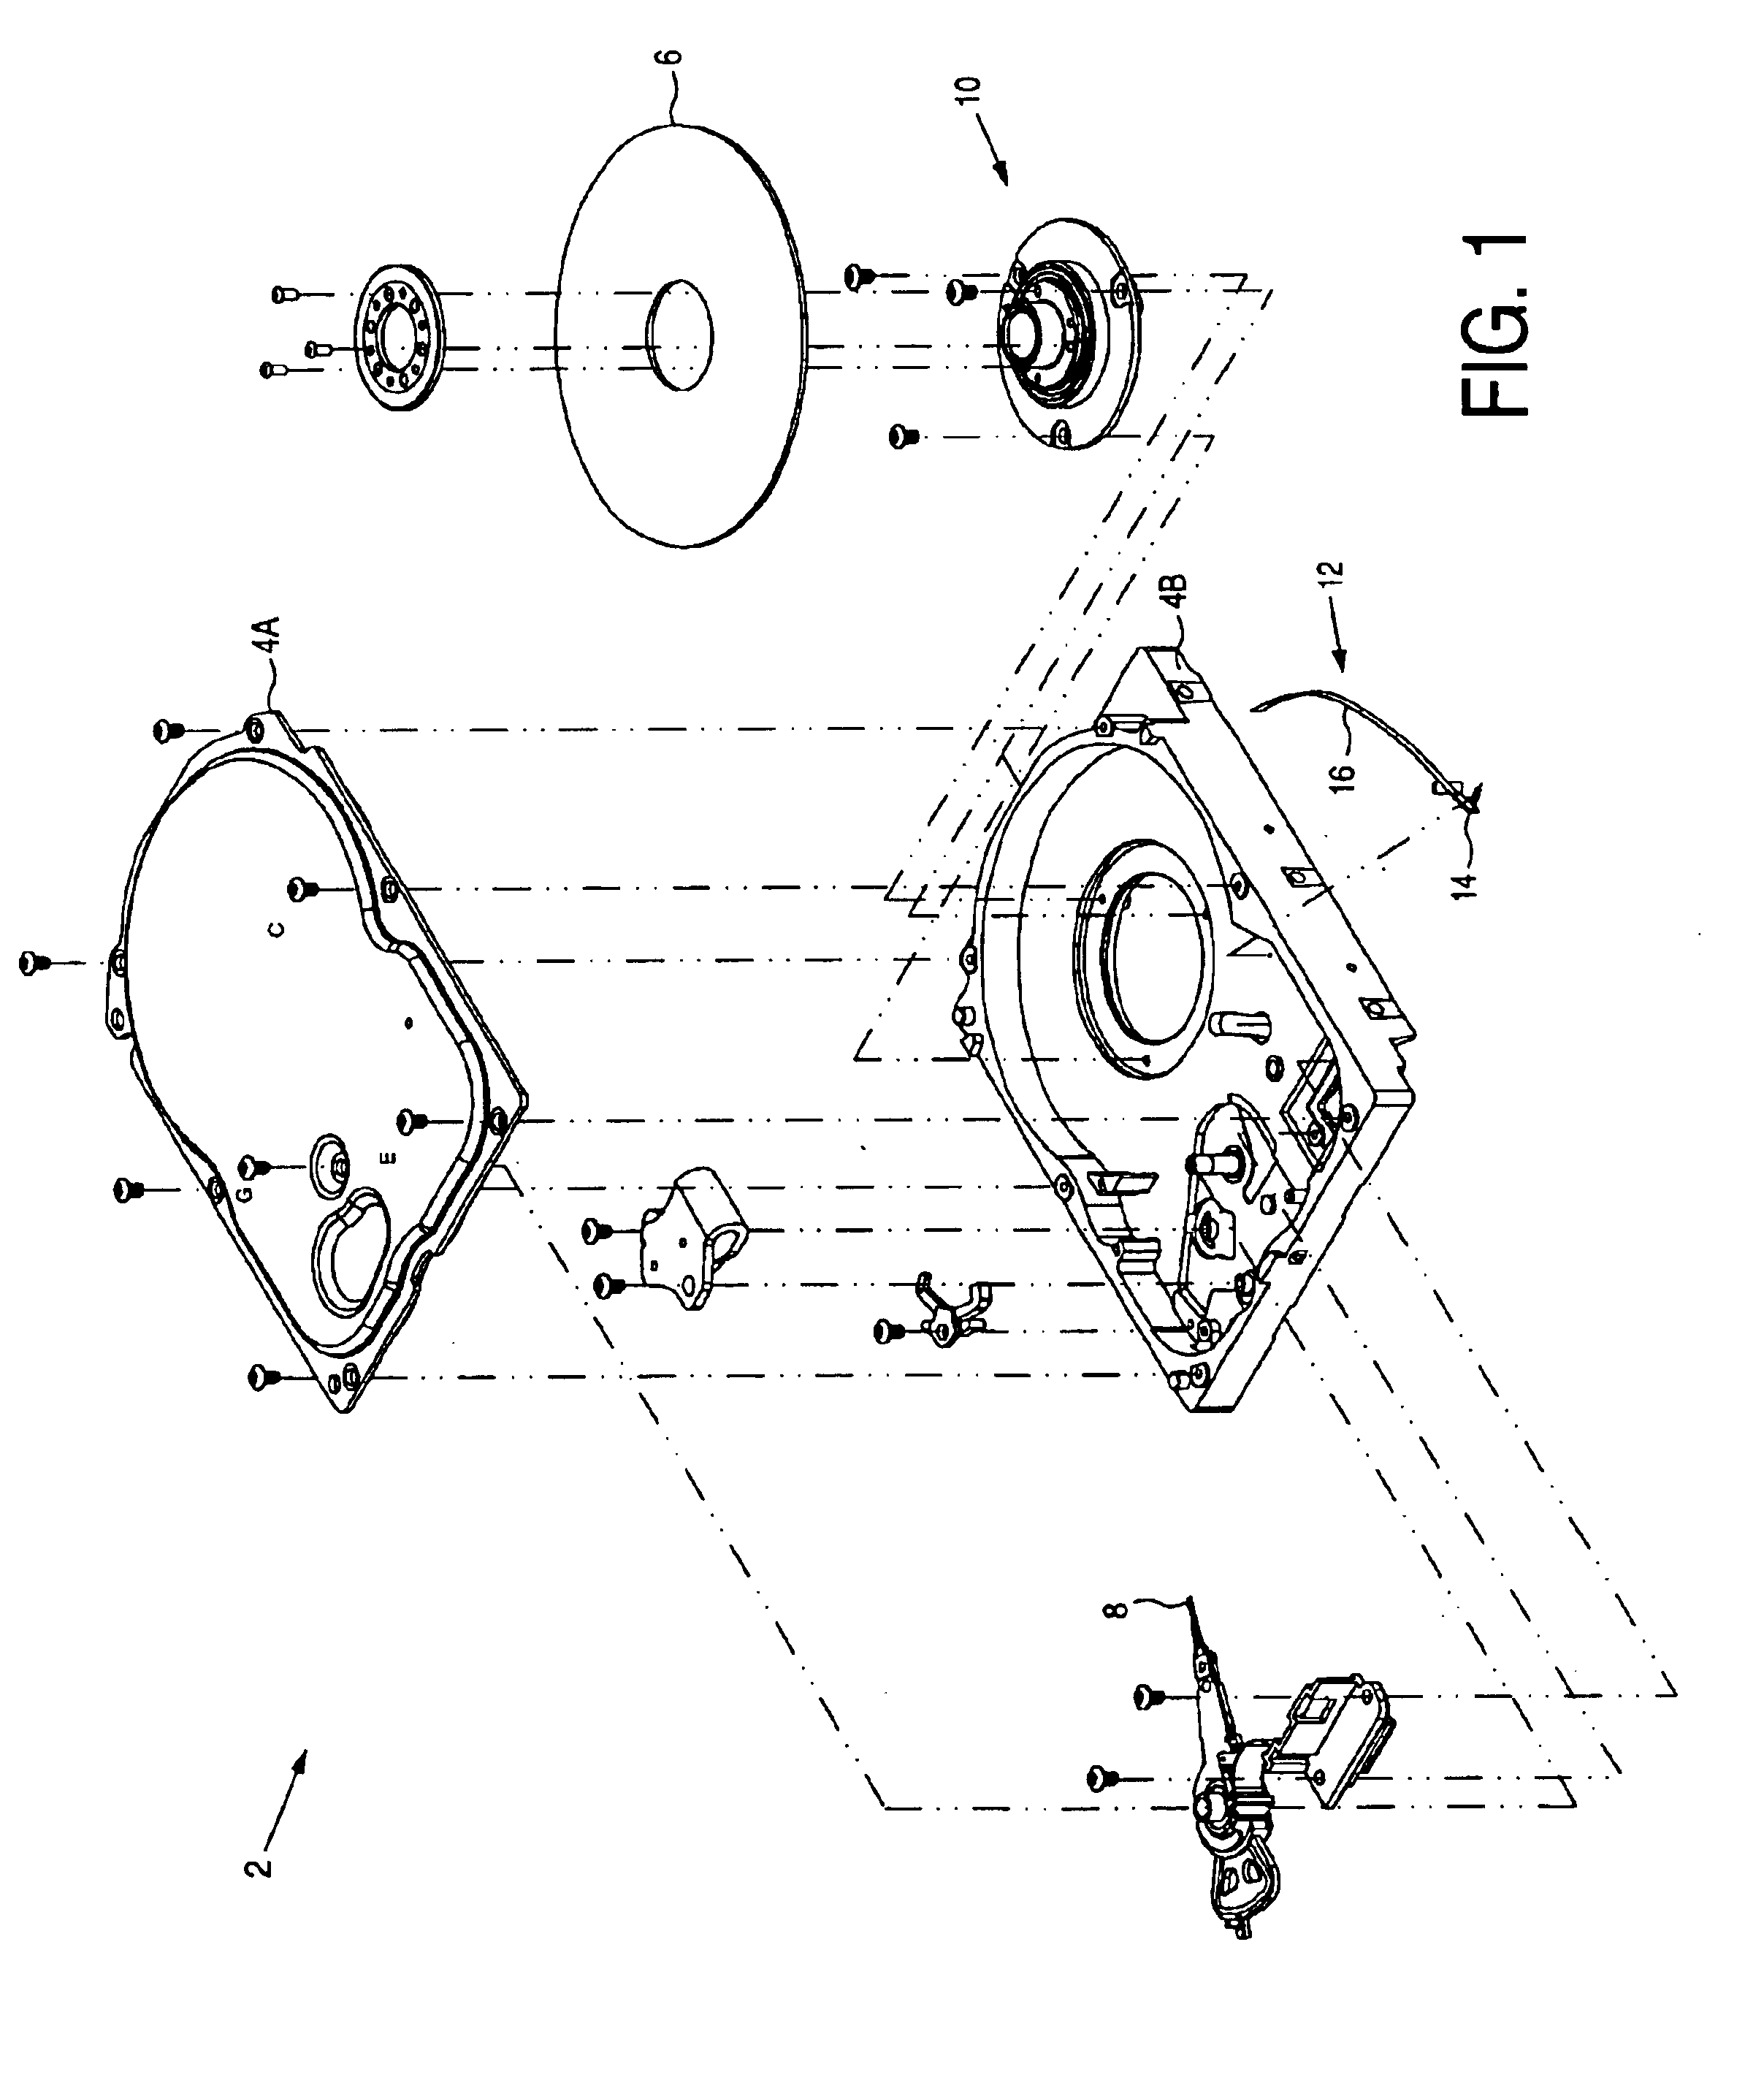 Disk drive comprising a ratchet arm applied to a disk and disengaged through windage generated by the disk rotating